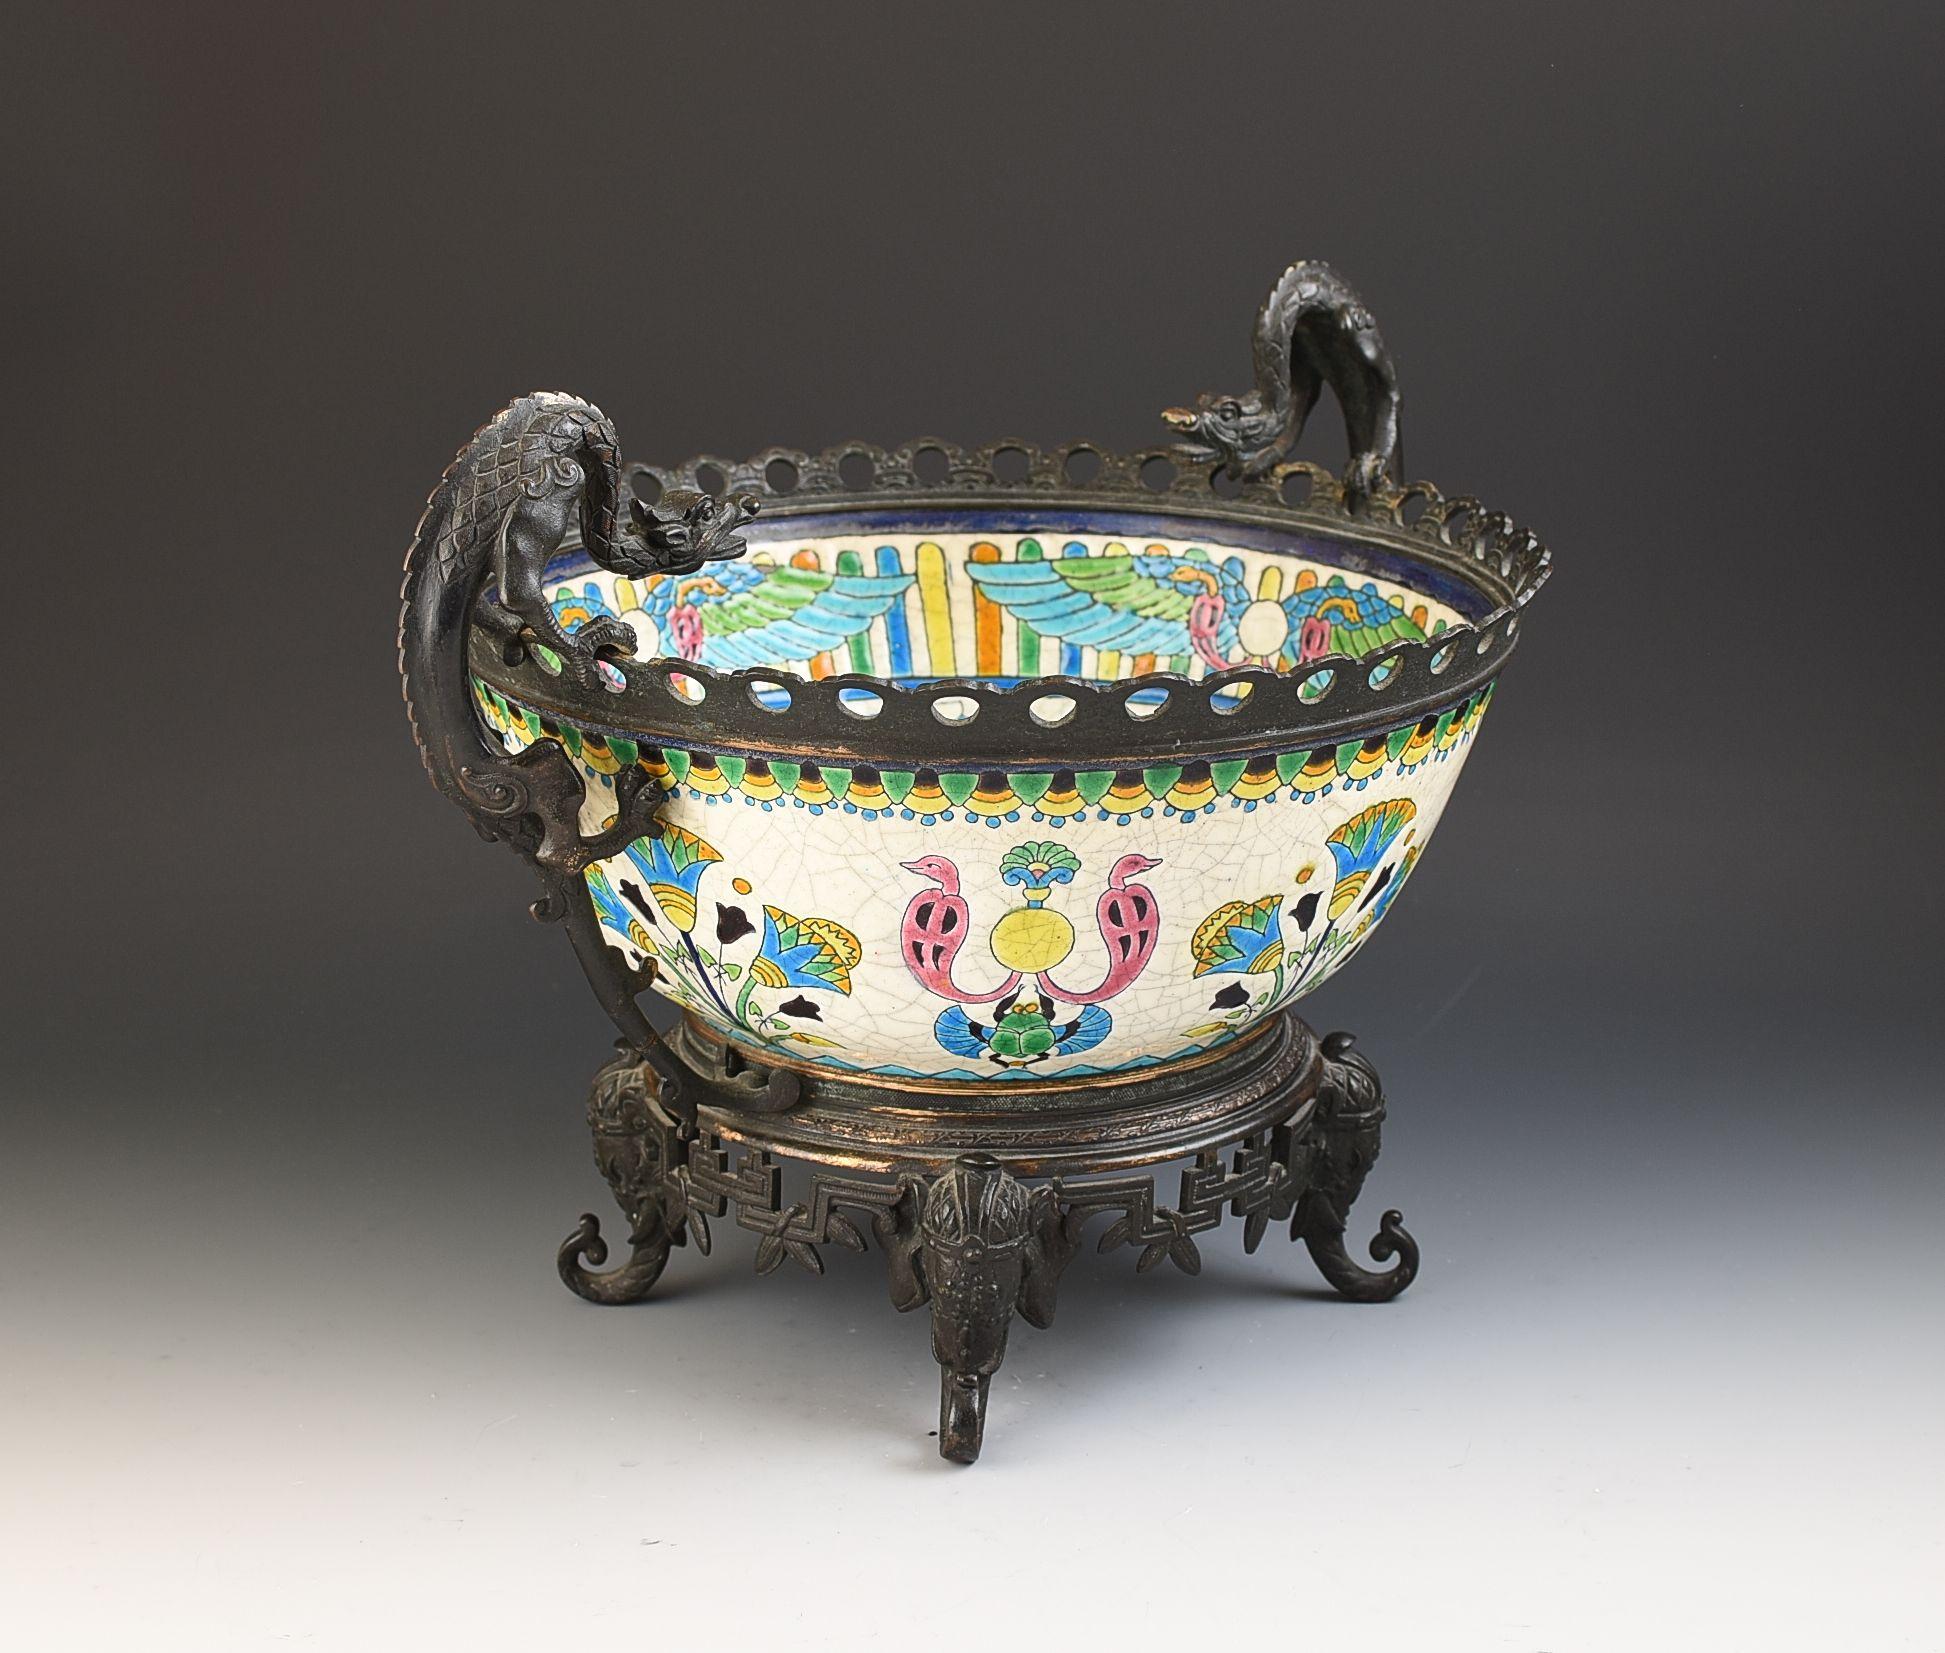 Aesthetic Movement Longwy FAIENCE FRENCH AETHSETIC MOVEMENT BRONZE MOUNTED DECORATIVE BOWL C.1885